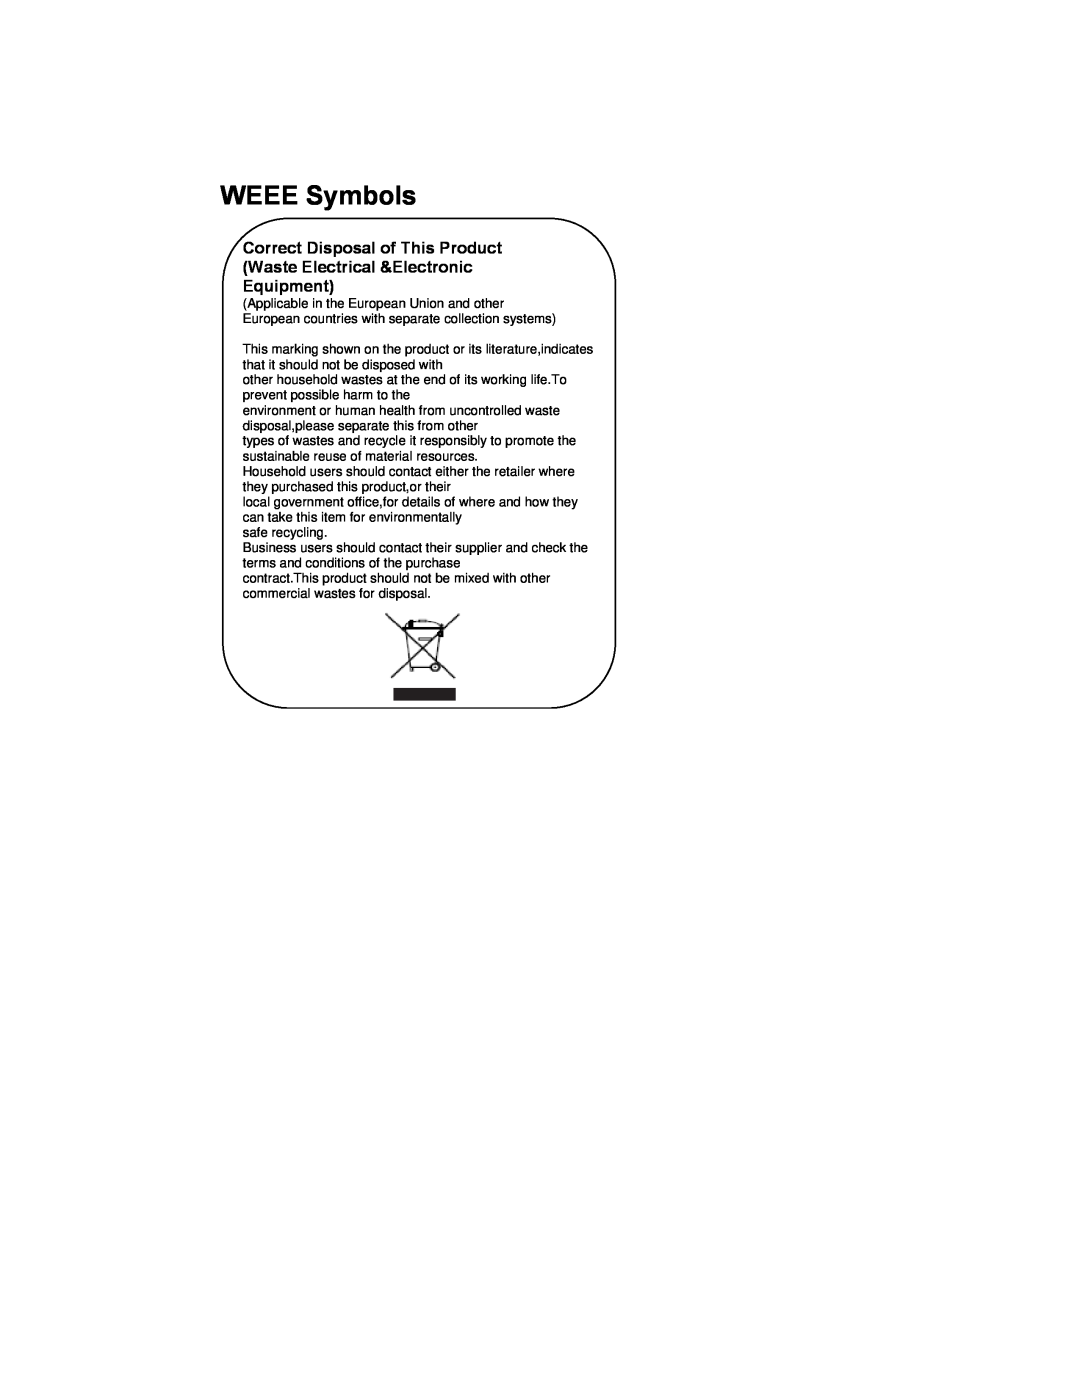 EverFocus EN-7515C WEEE Symbols, Correct Disposal of This Product Waste Electrical &Electronic, Equipment 